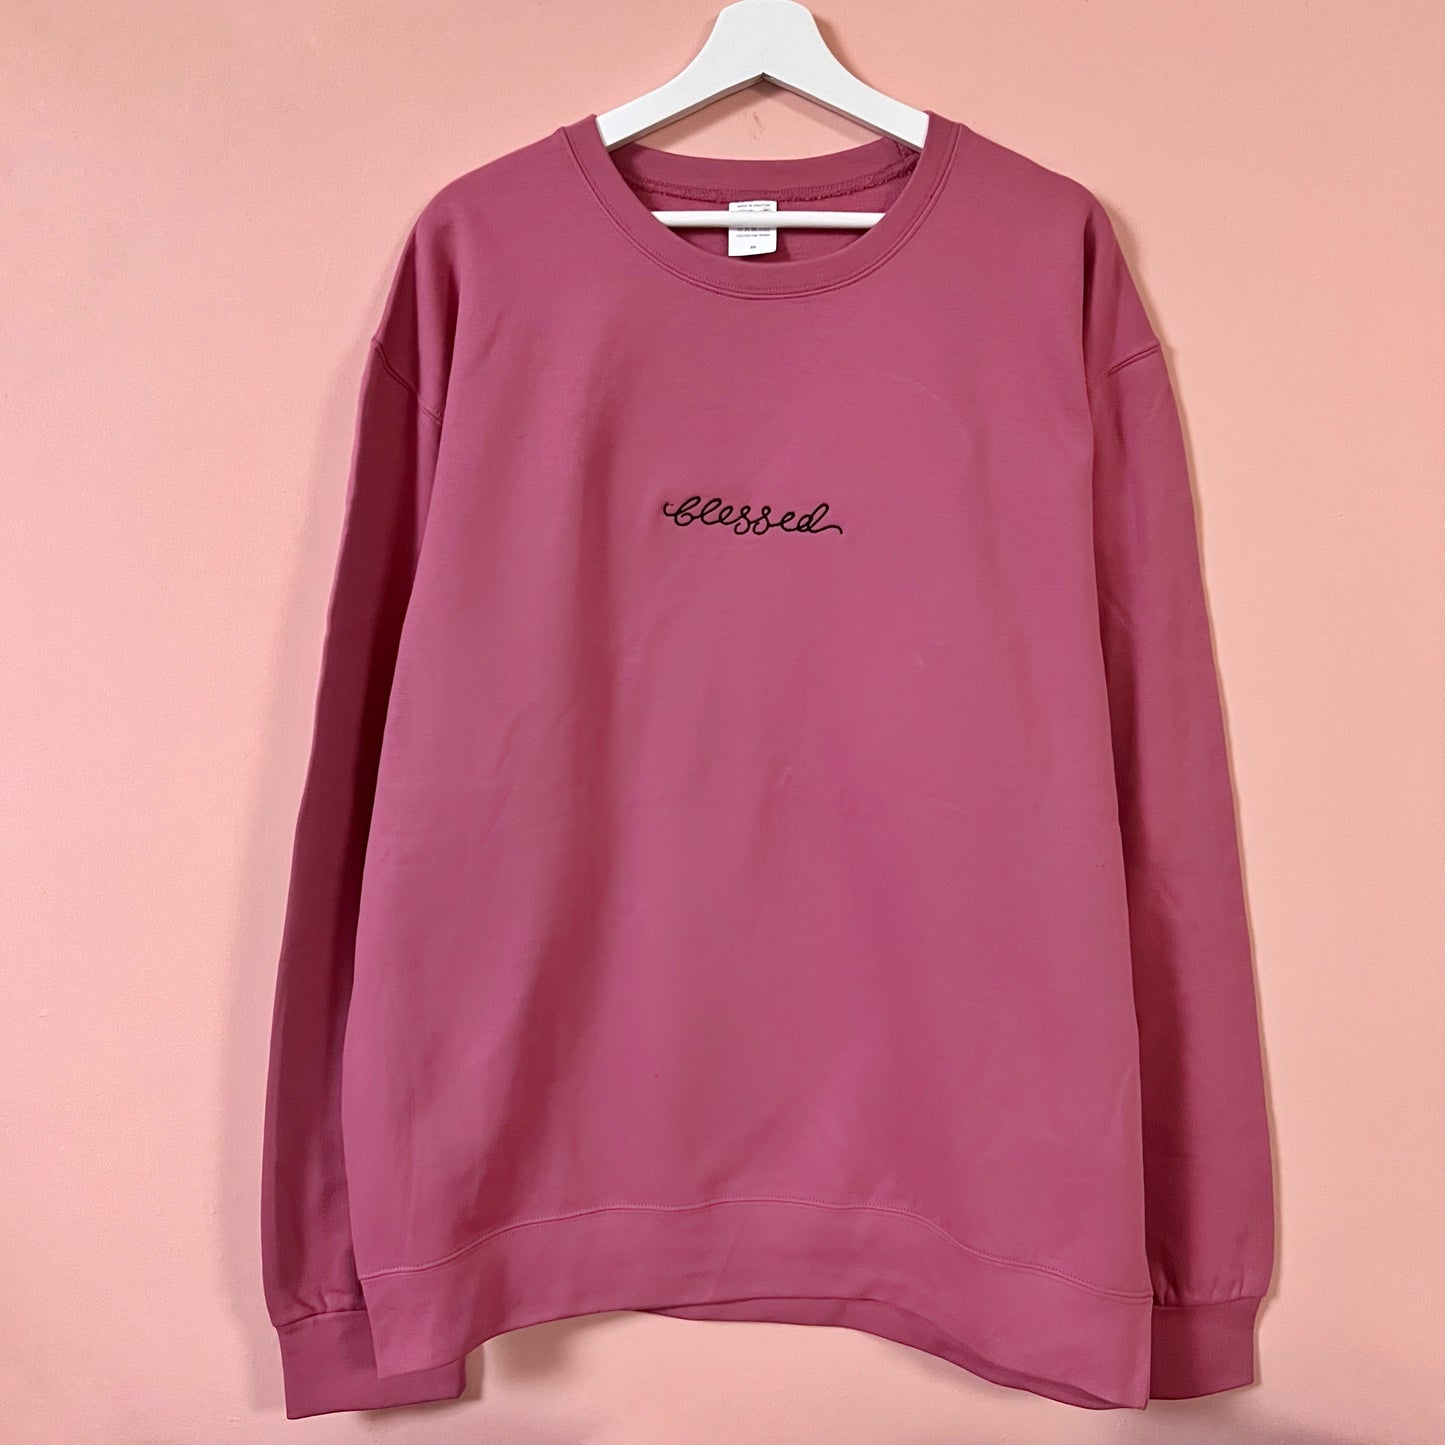 blessed embroidered sweatshirt - pink